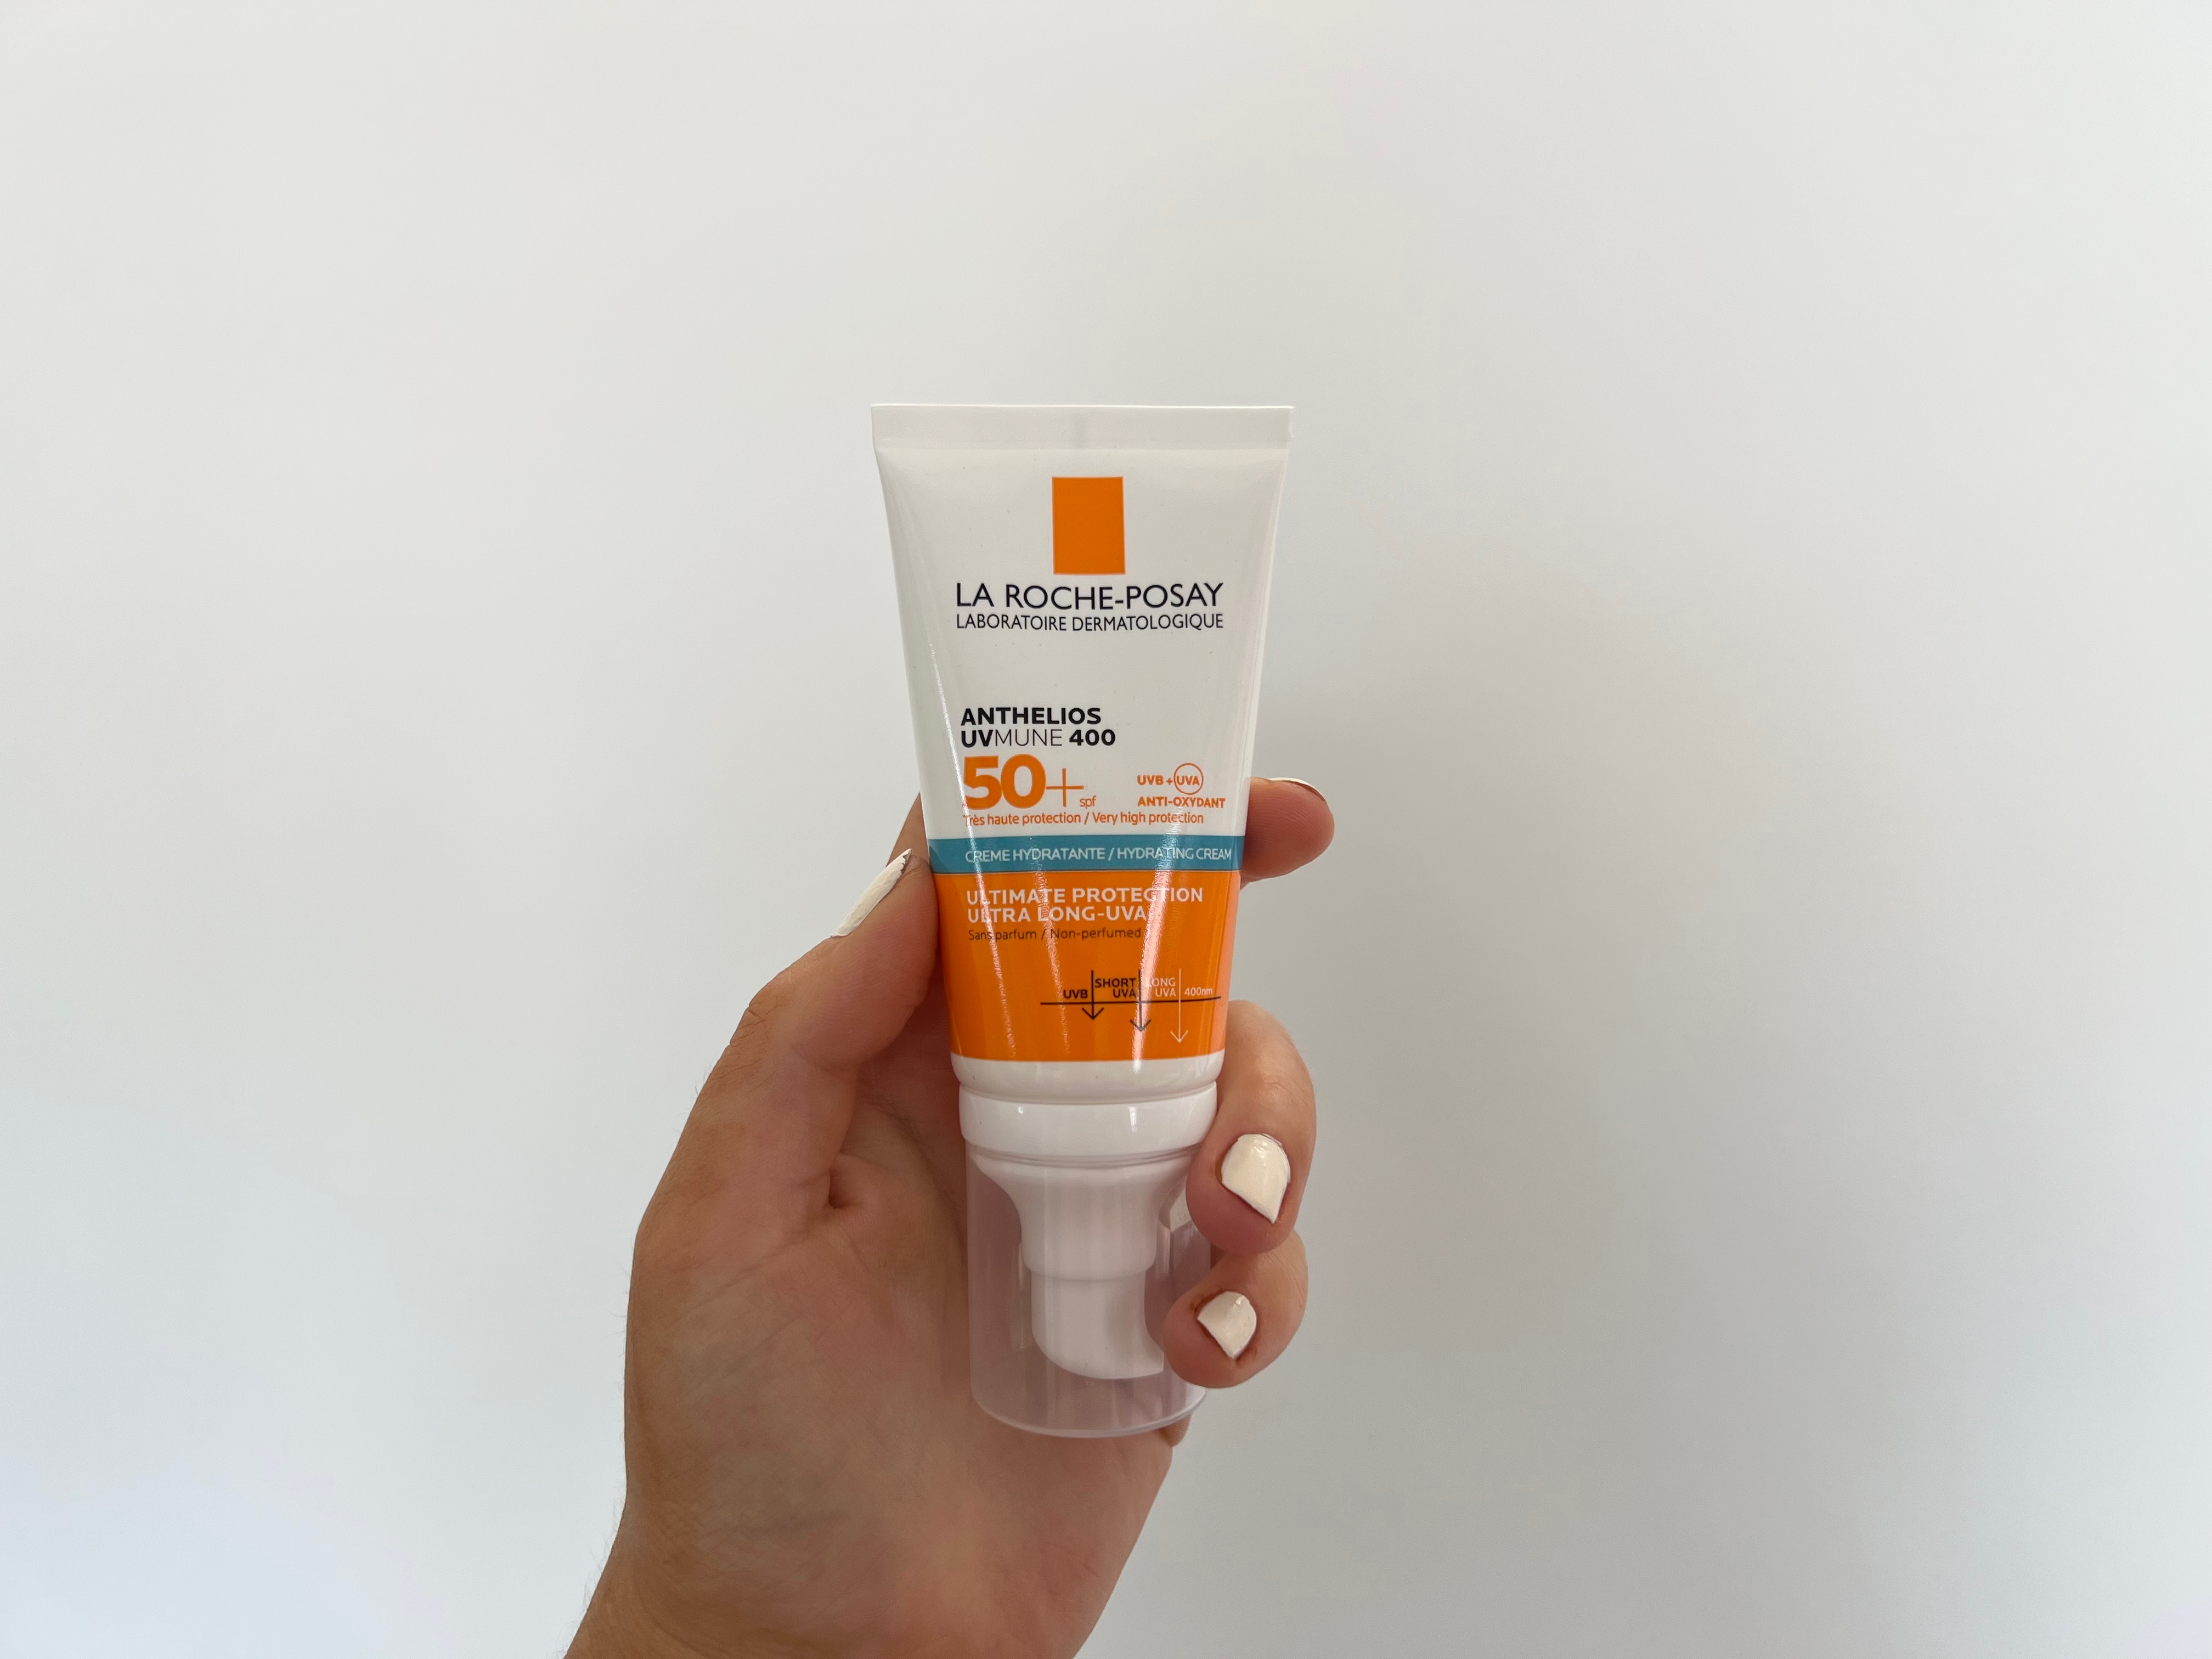 La Roche-Posay anthelios UVmune 400 hydrating cream  review